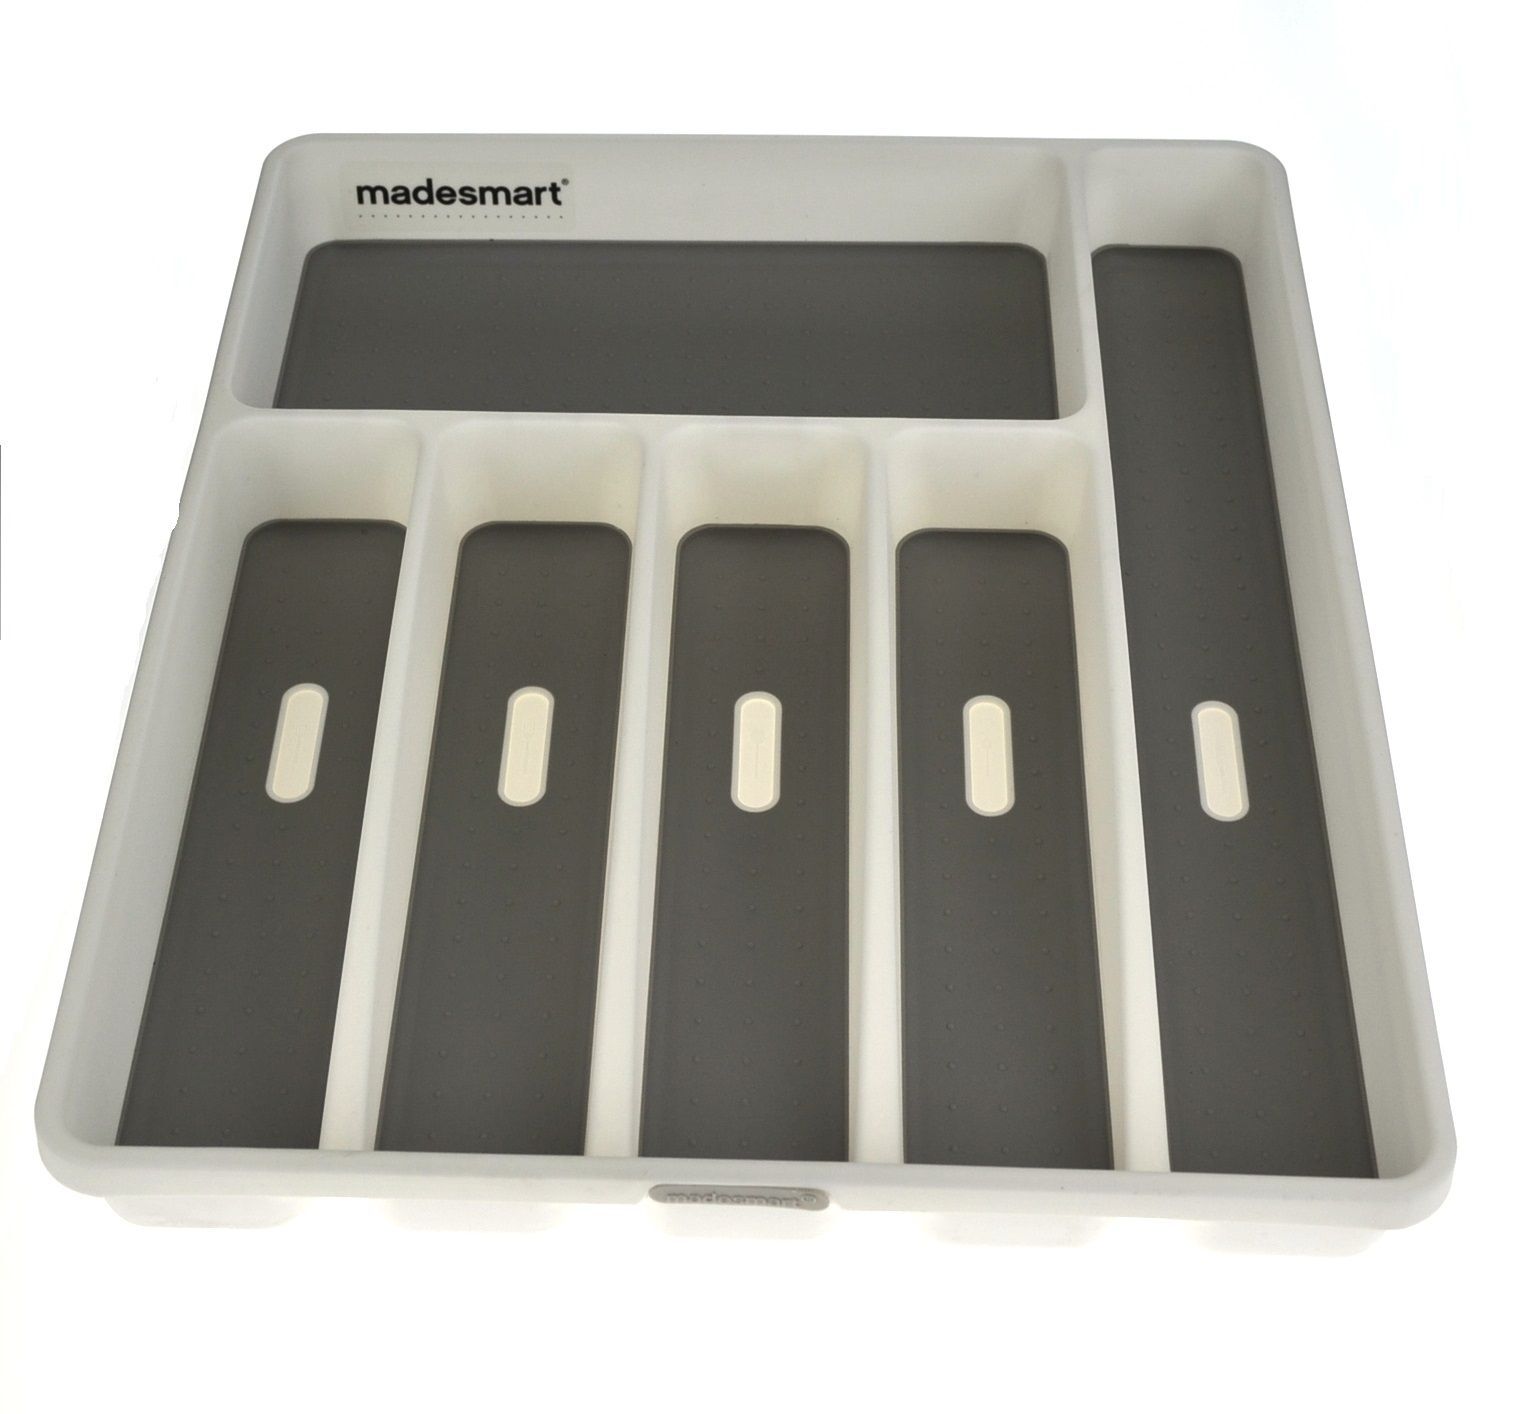 Madesmart Cutlery Tray 6 Compartment 